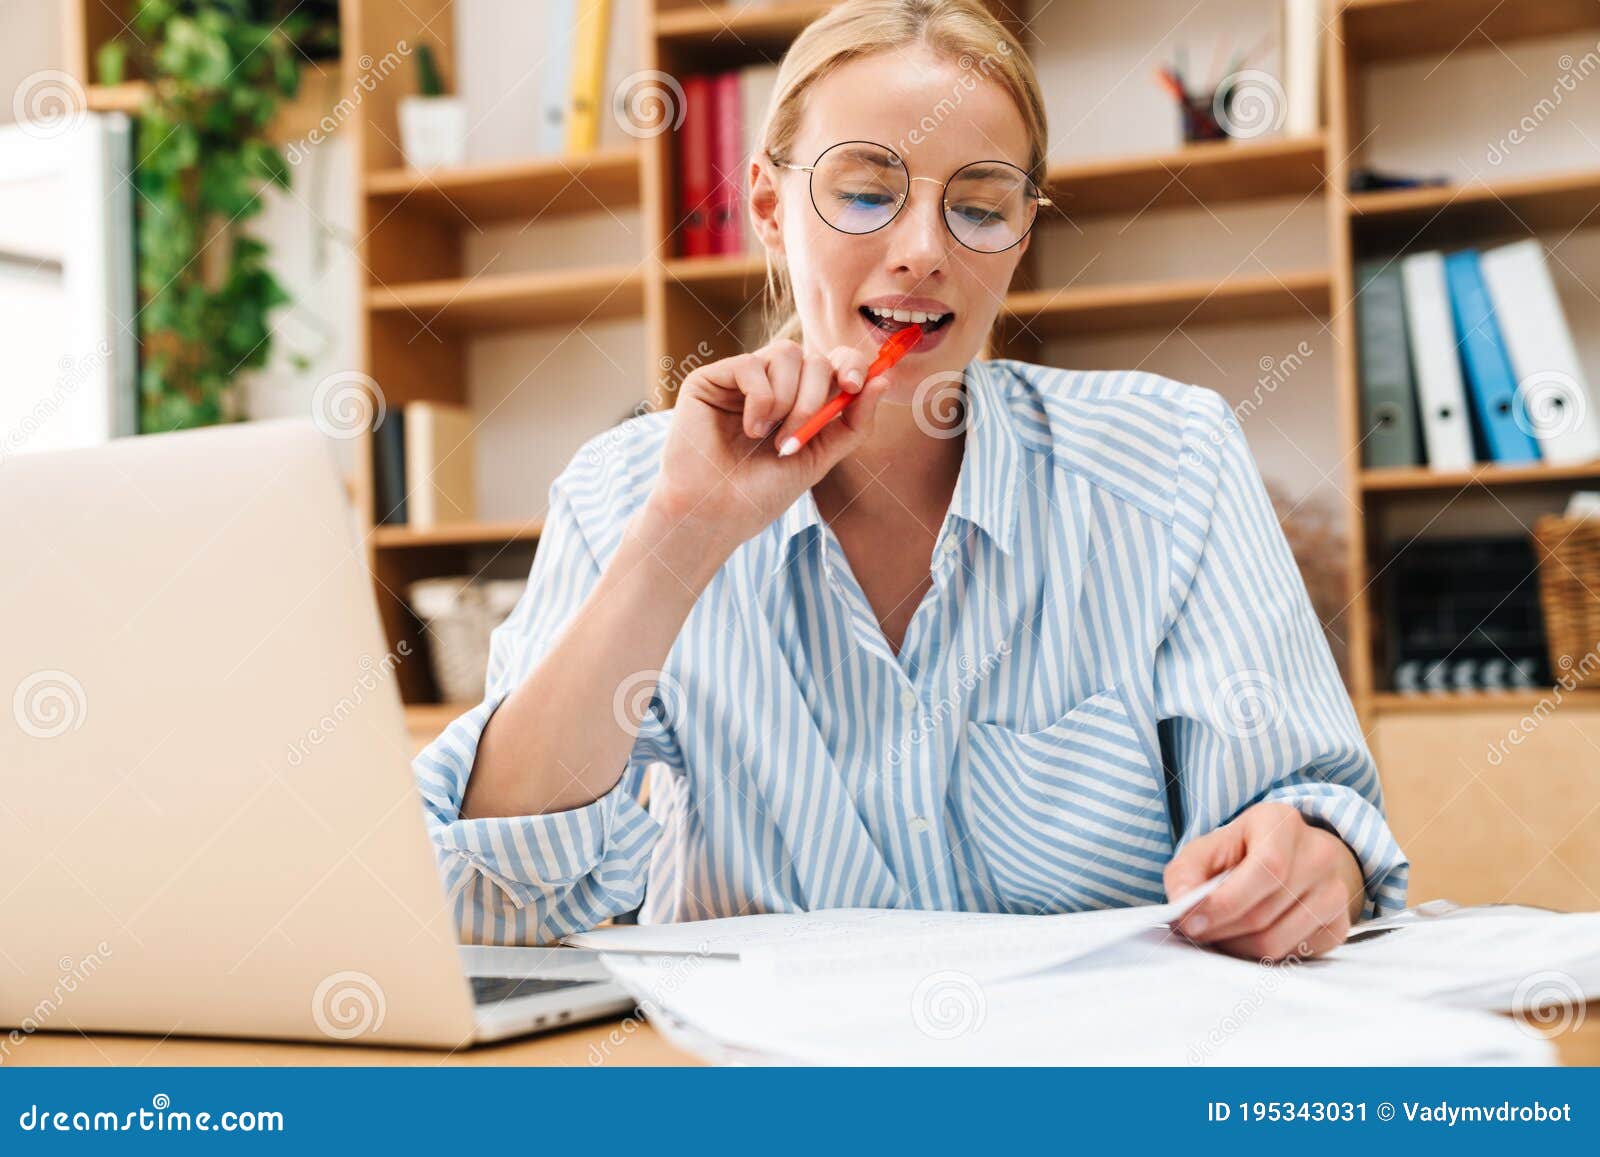 Image of Thinking Woman Writing Down Notes while Working with Laptop ...